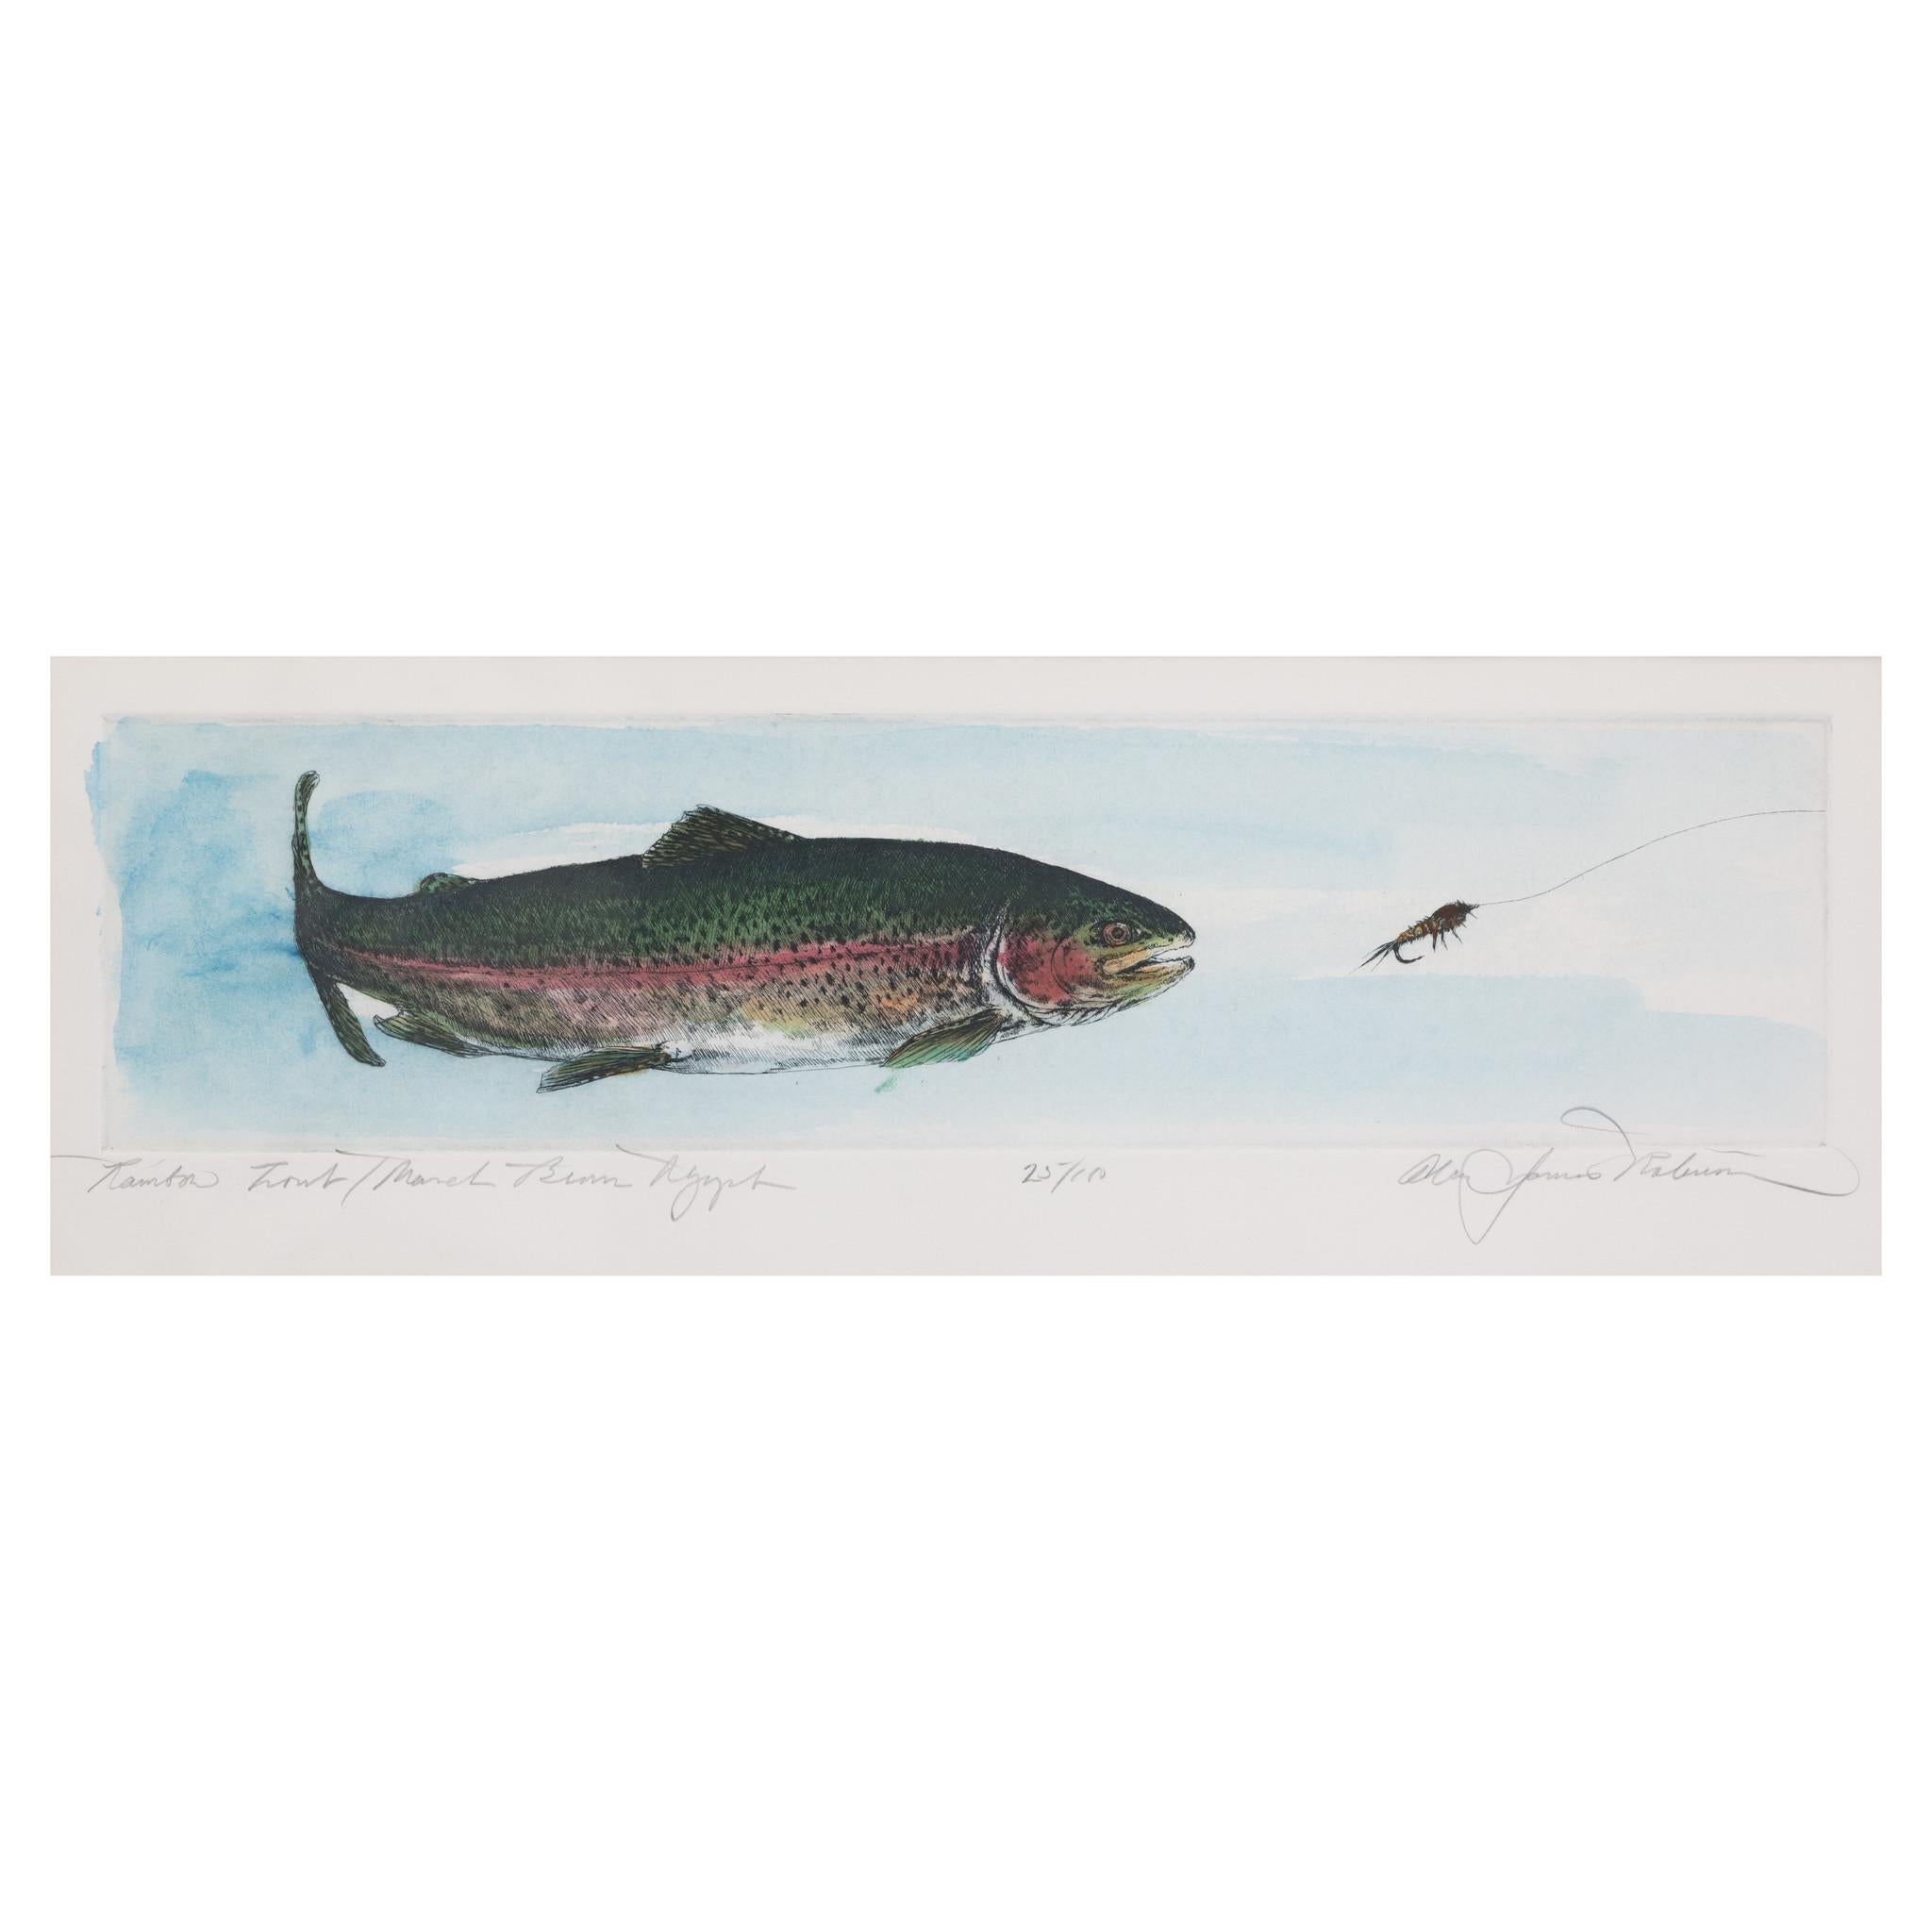 Three signed engravings of trout species framed together with tied fishing flies by Alan James Robinson. All images printed in black with hand water coloring, titled in pencil and signed. The framed flies also represented in the images. Set of